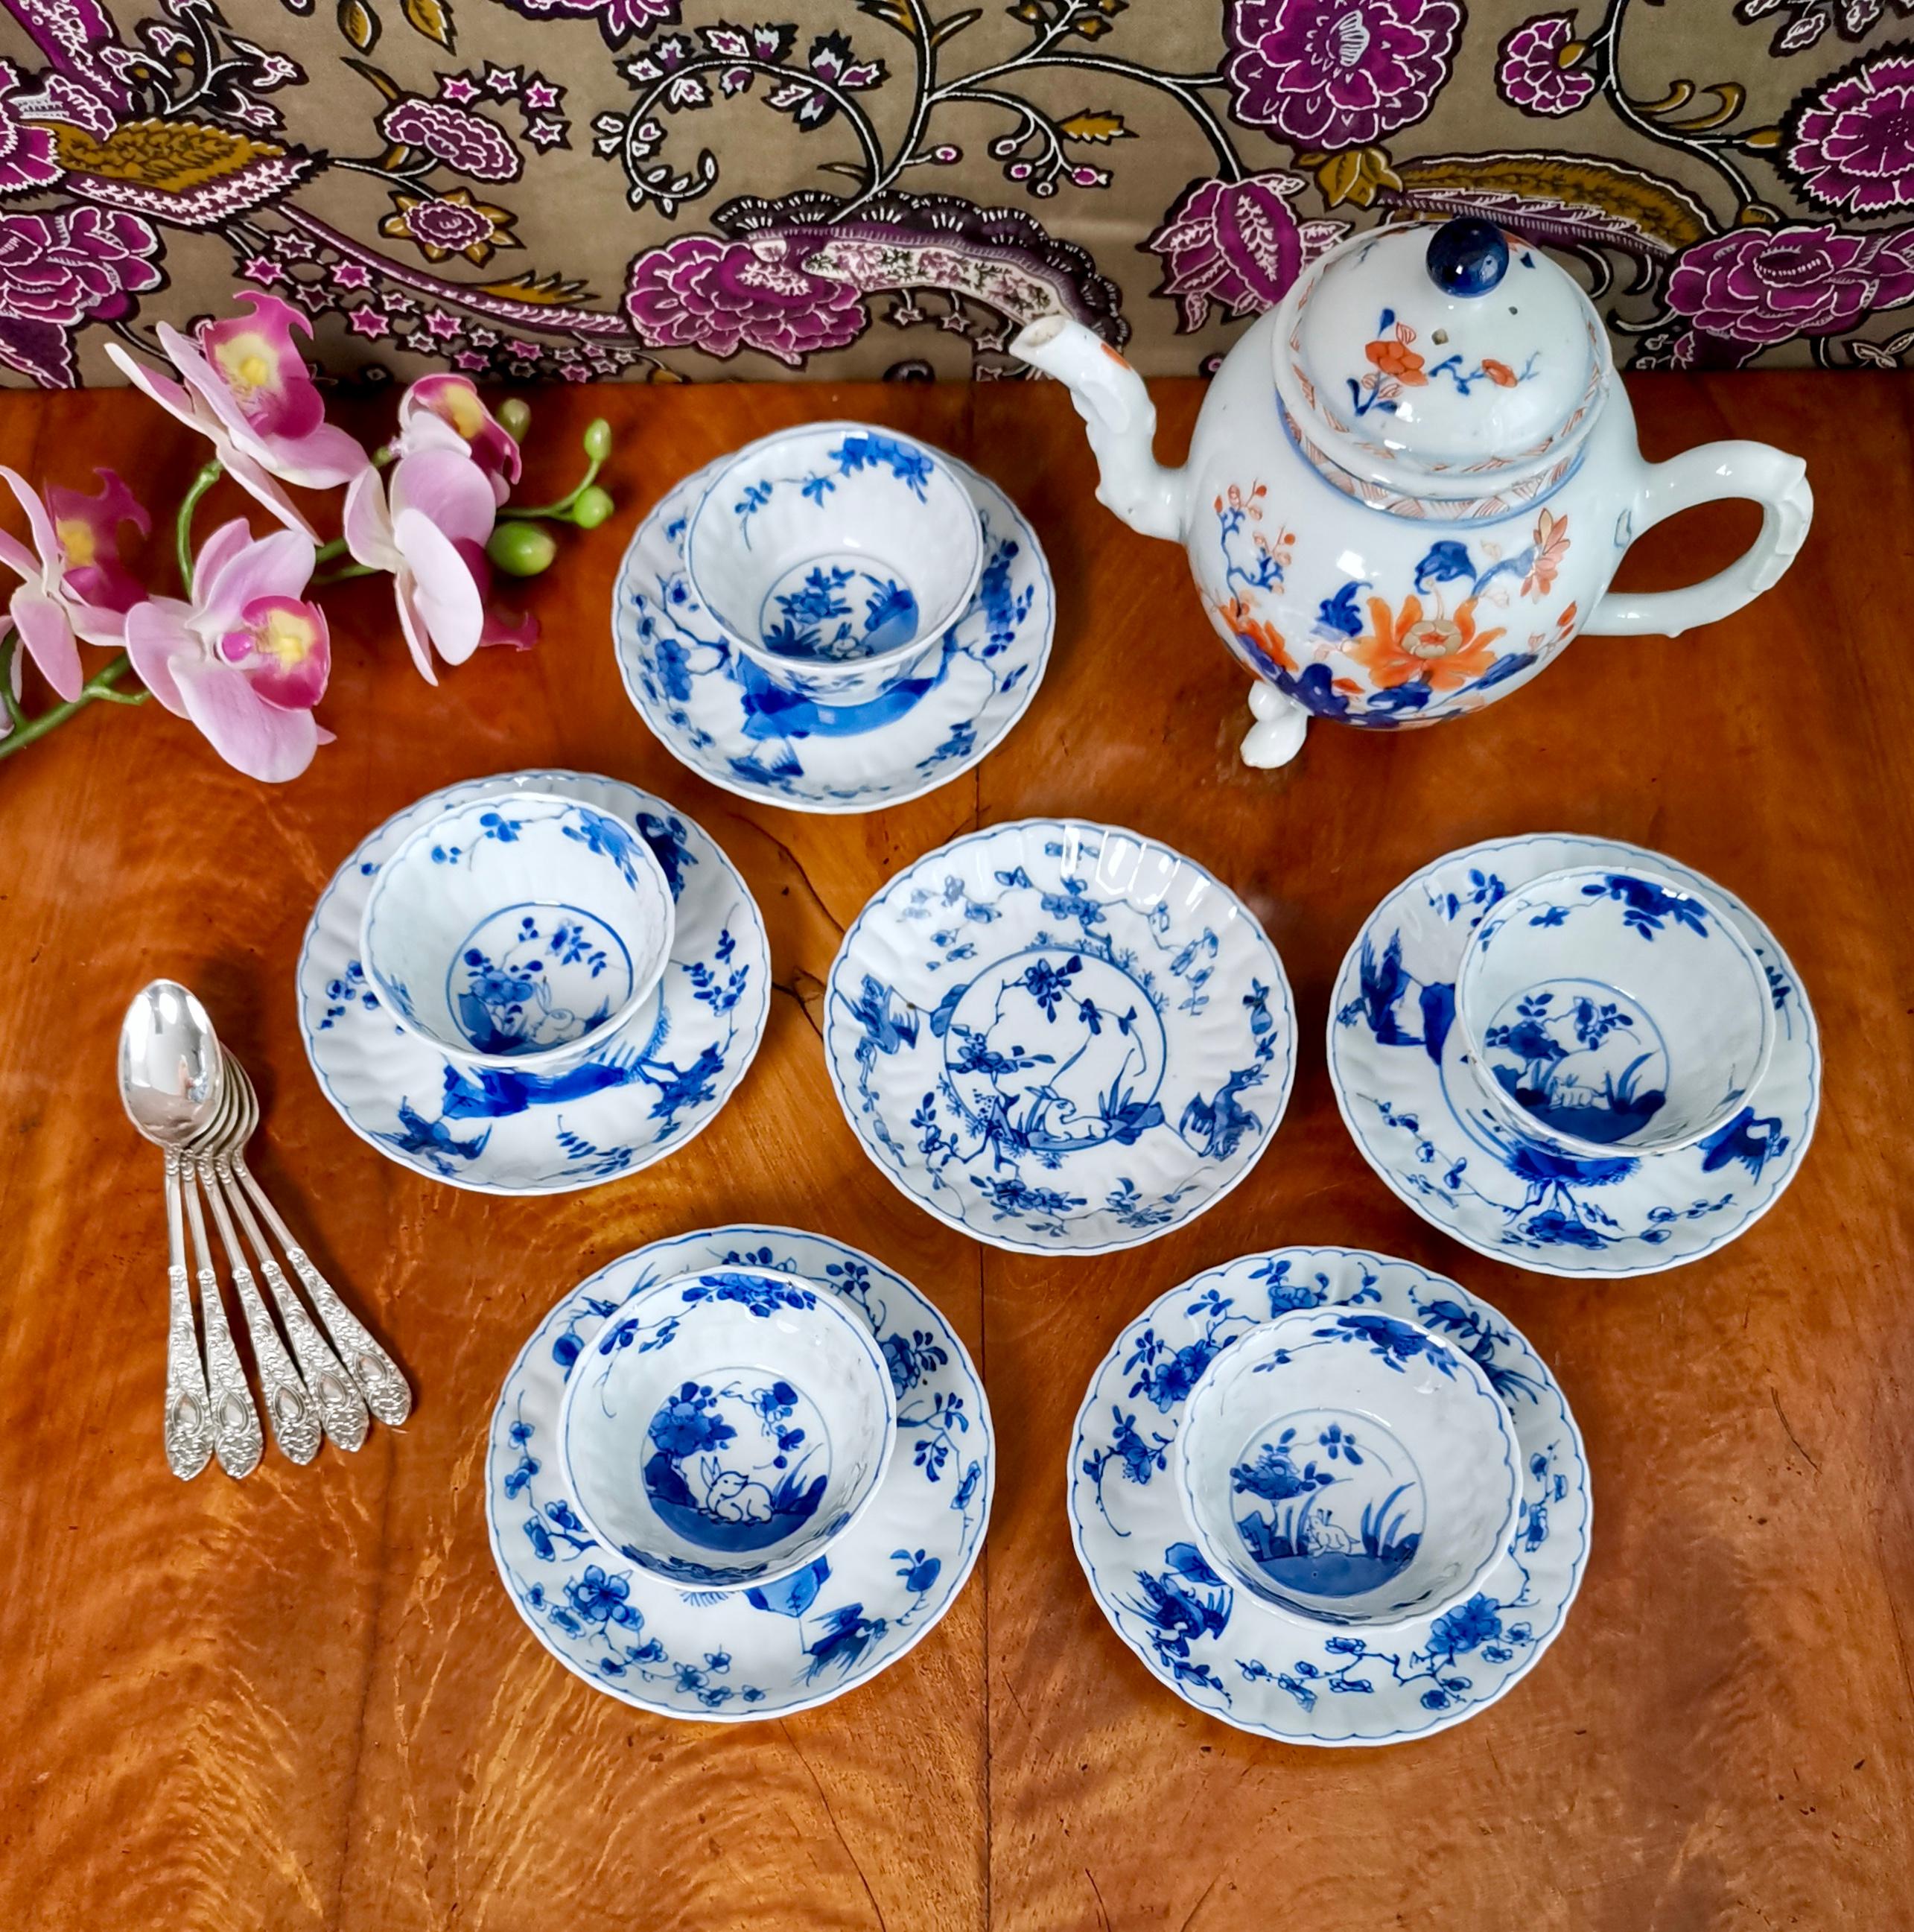 This is a very charming set of five tea bowls and six saucers made in China for export to the West in the 19th Century. The set is made in the 